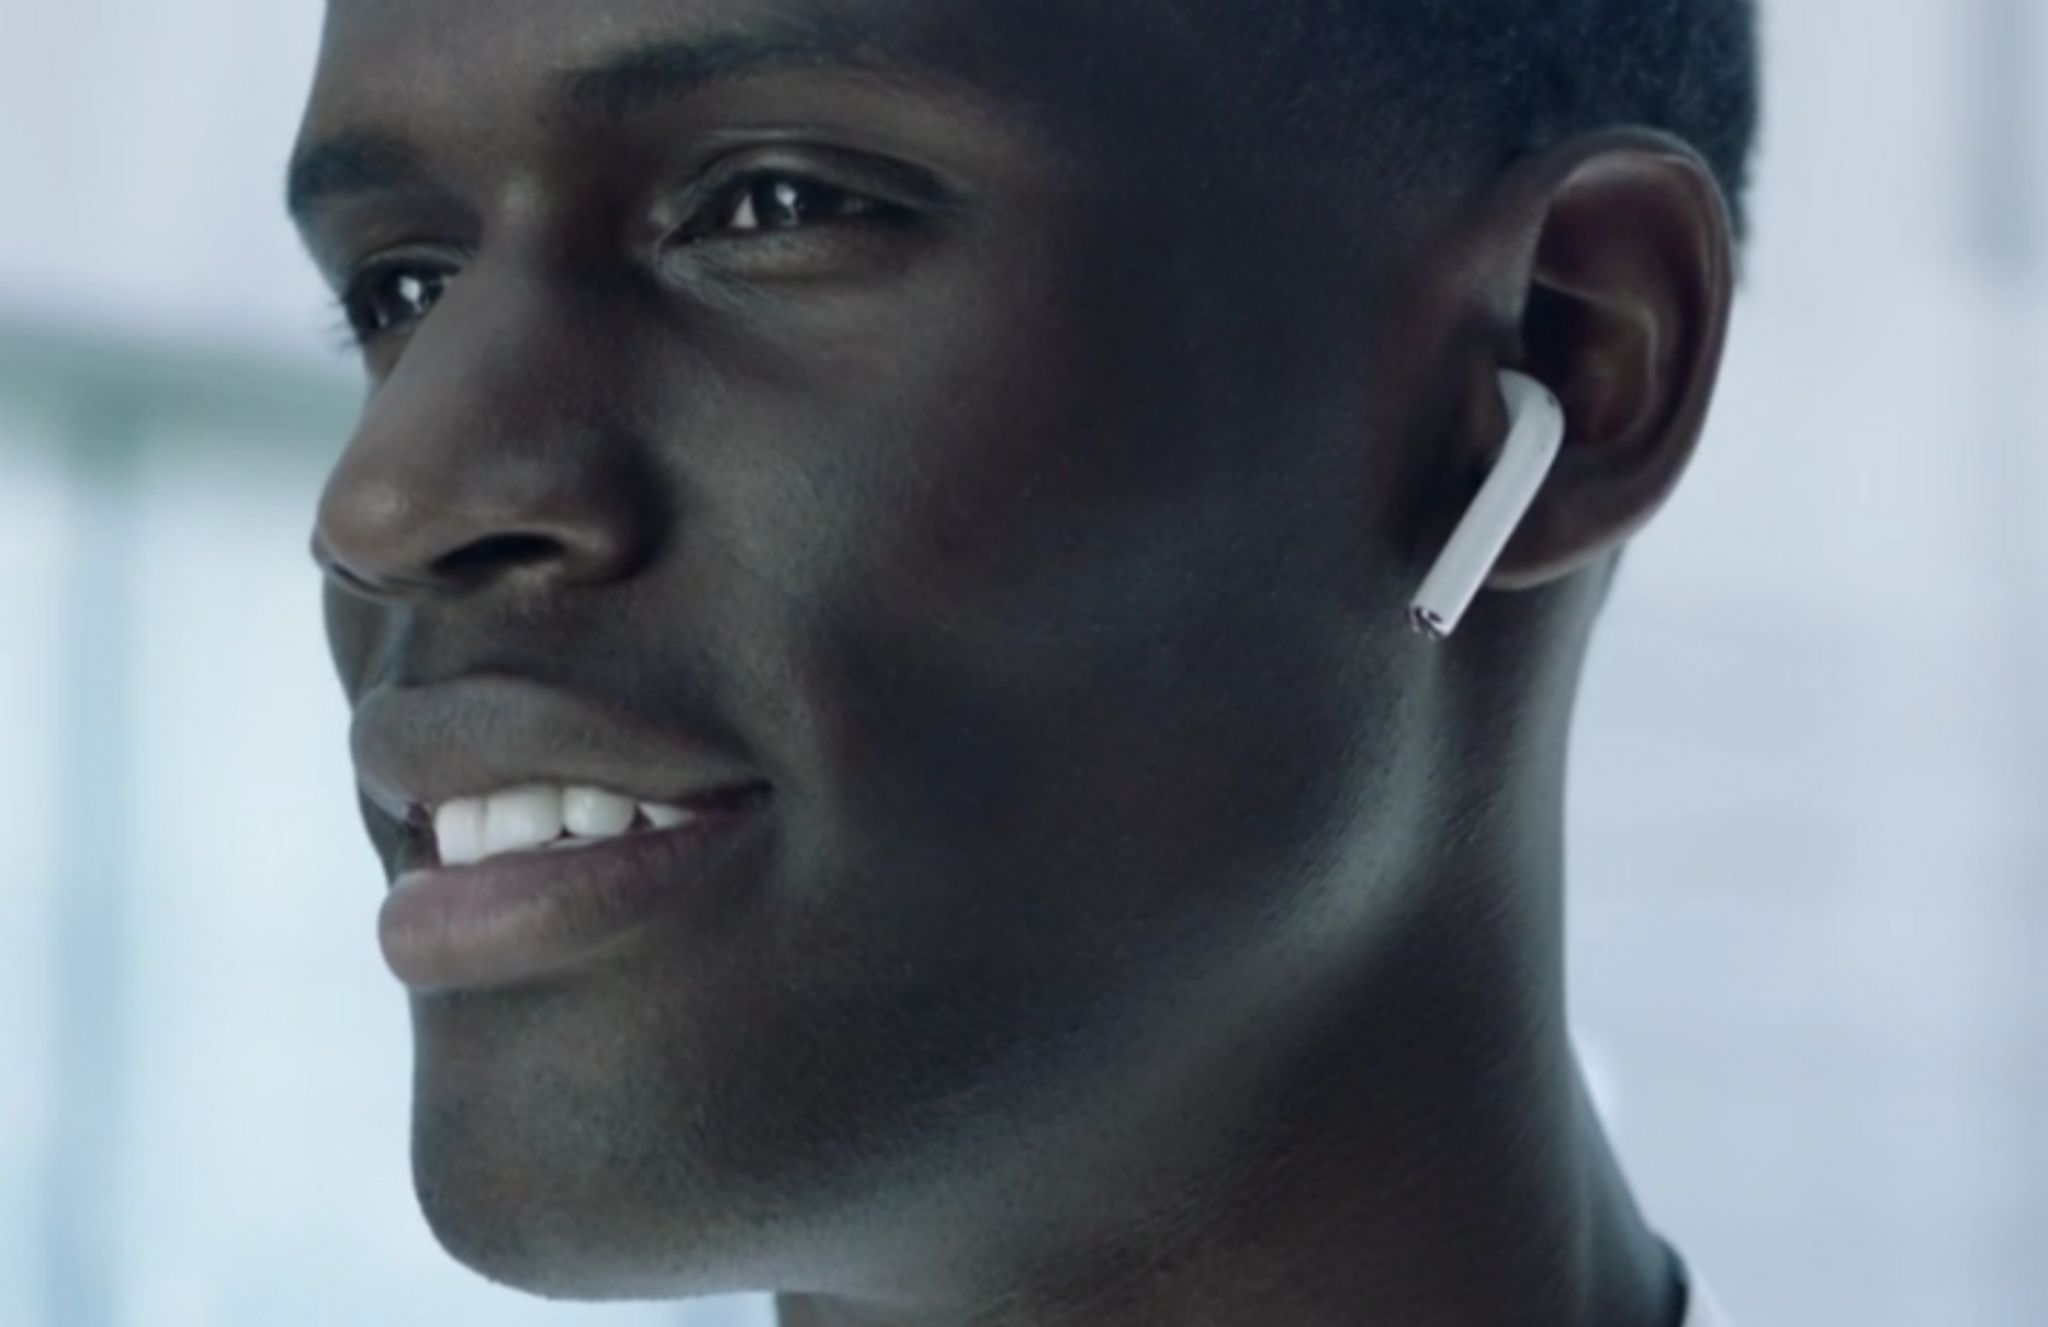 Apple AirPods: tech for a truly wireless future